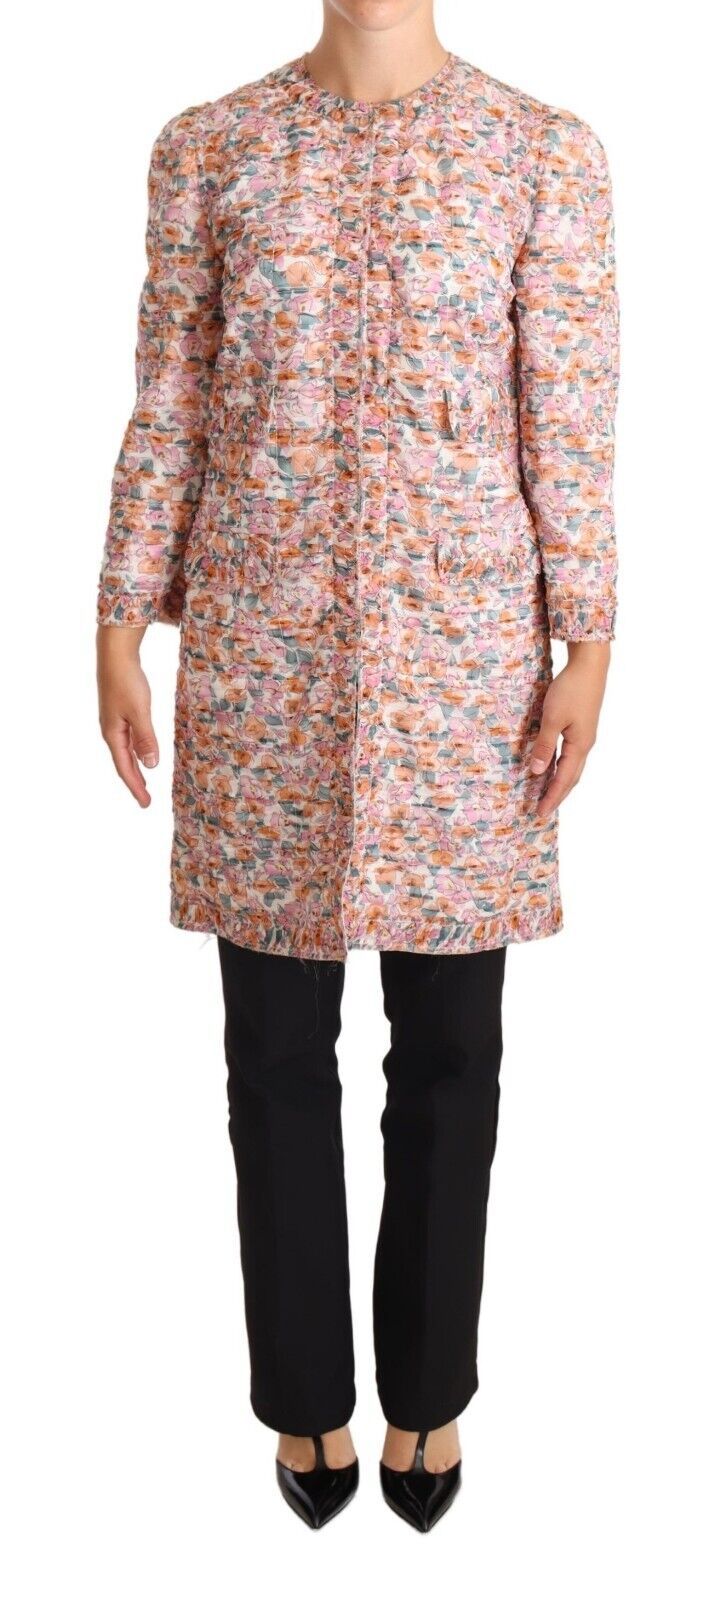 Dolce & Gabbana Multicolor Floral Print Silk Trench Coat Women's Jacket